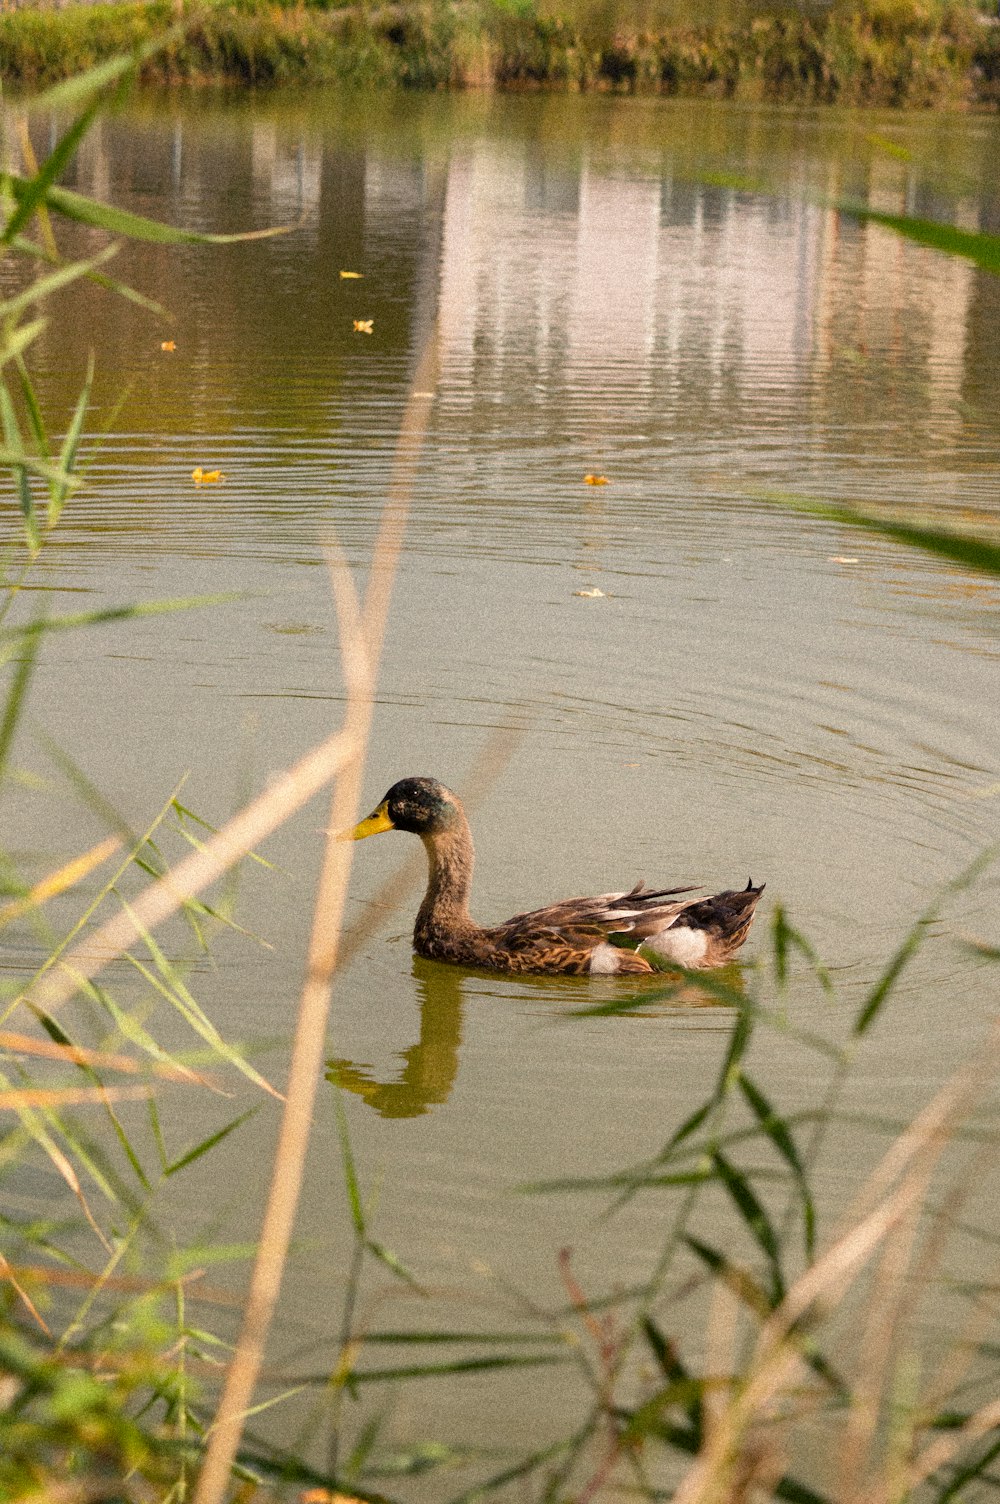 a duck swimming in a pond